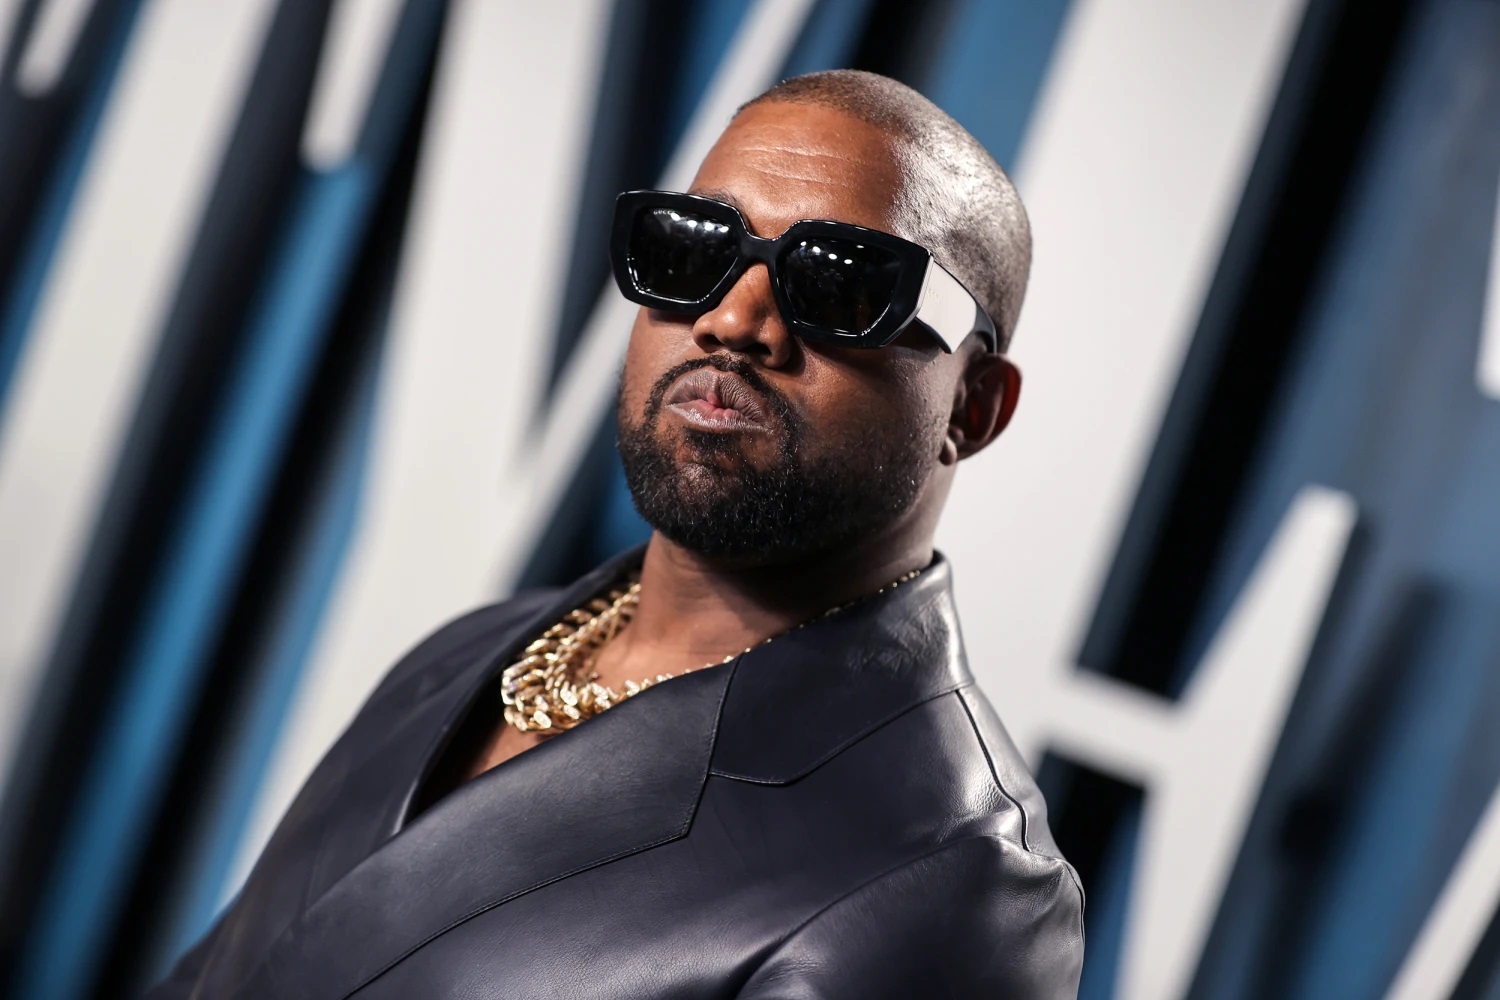 kanye-west-sparks-controversy-with-ai-like-apology-for-antisemitic-rants